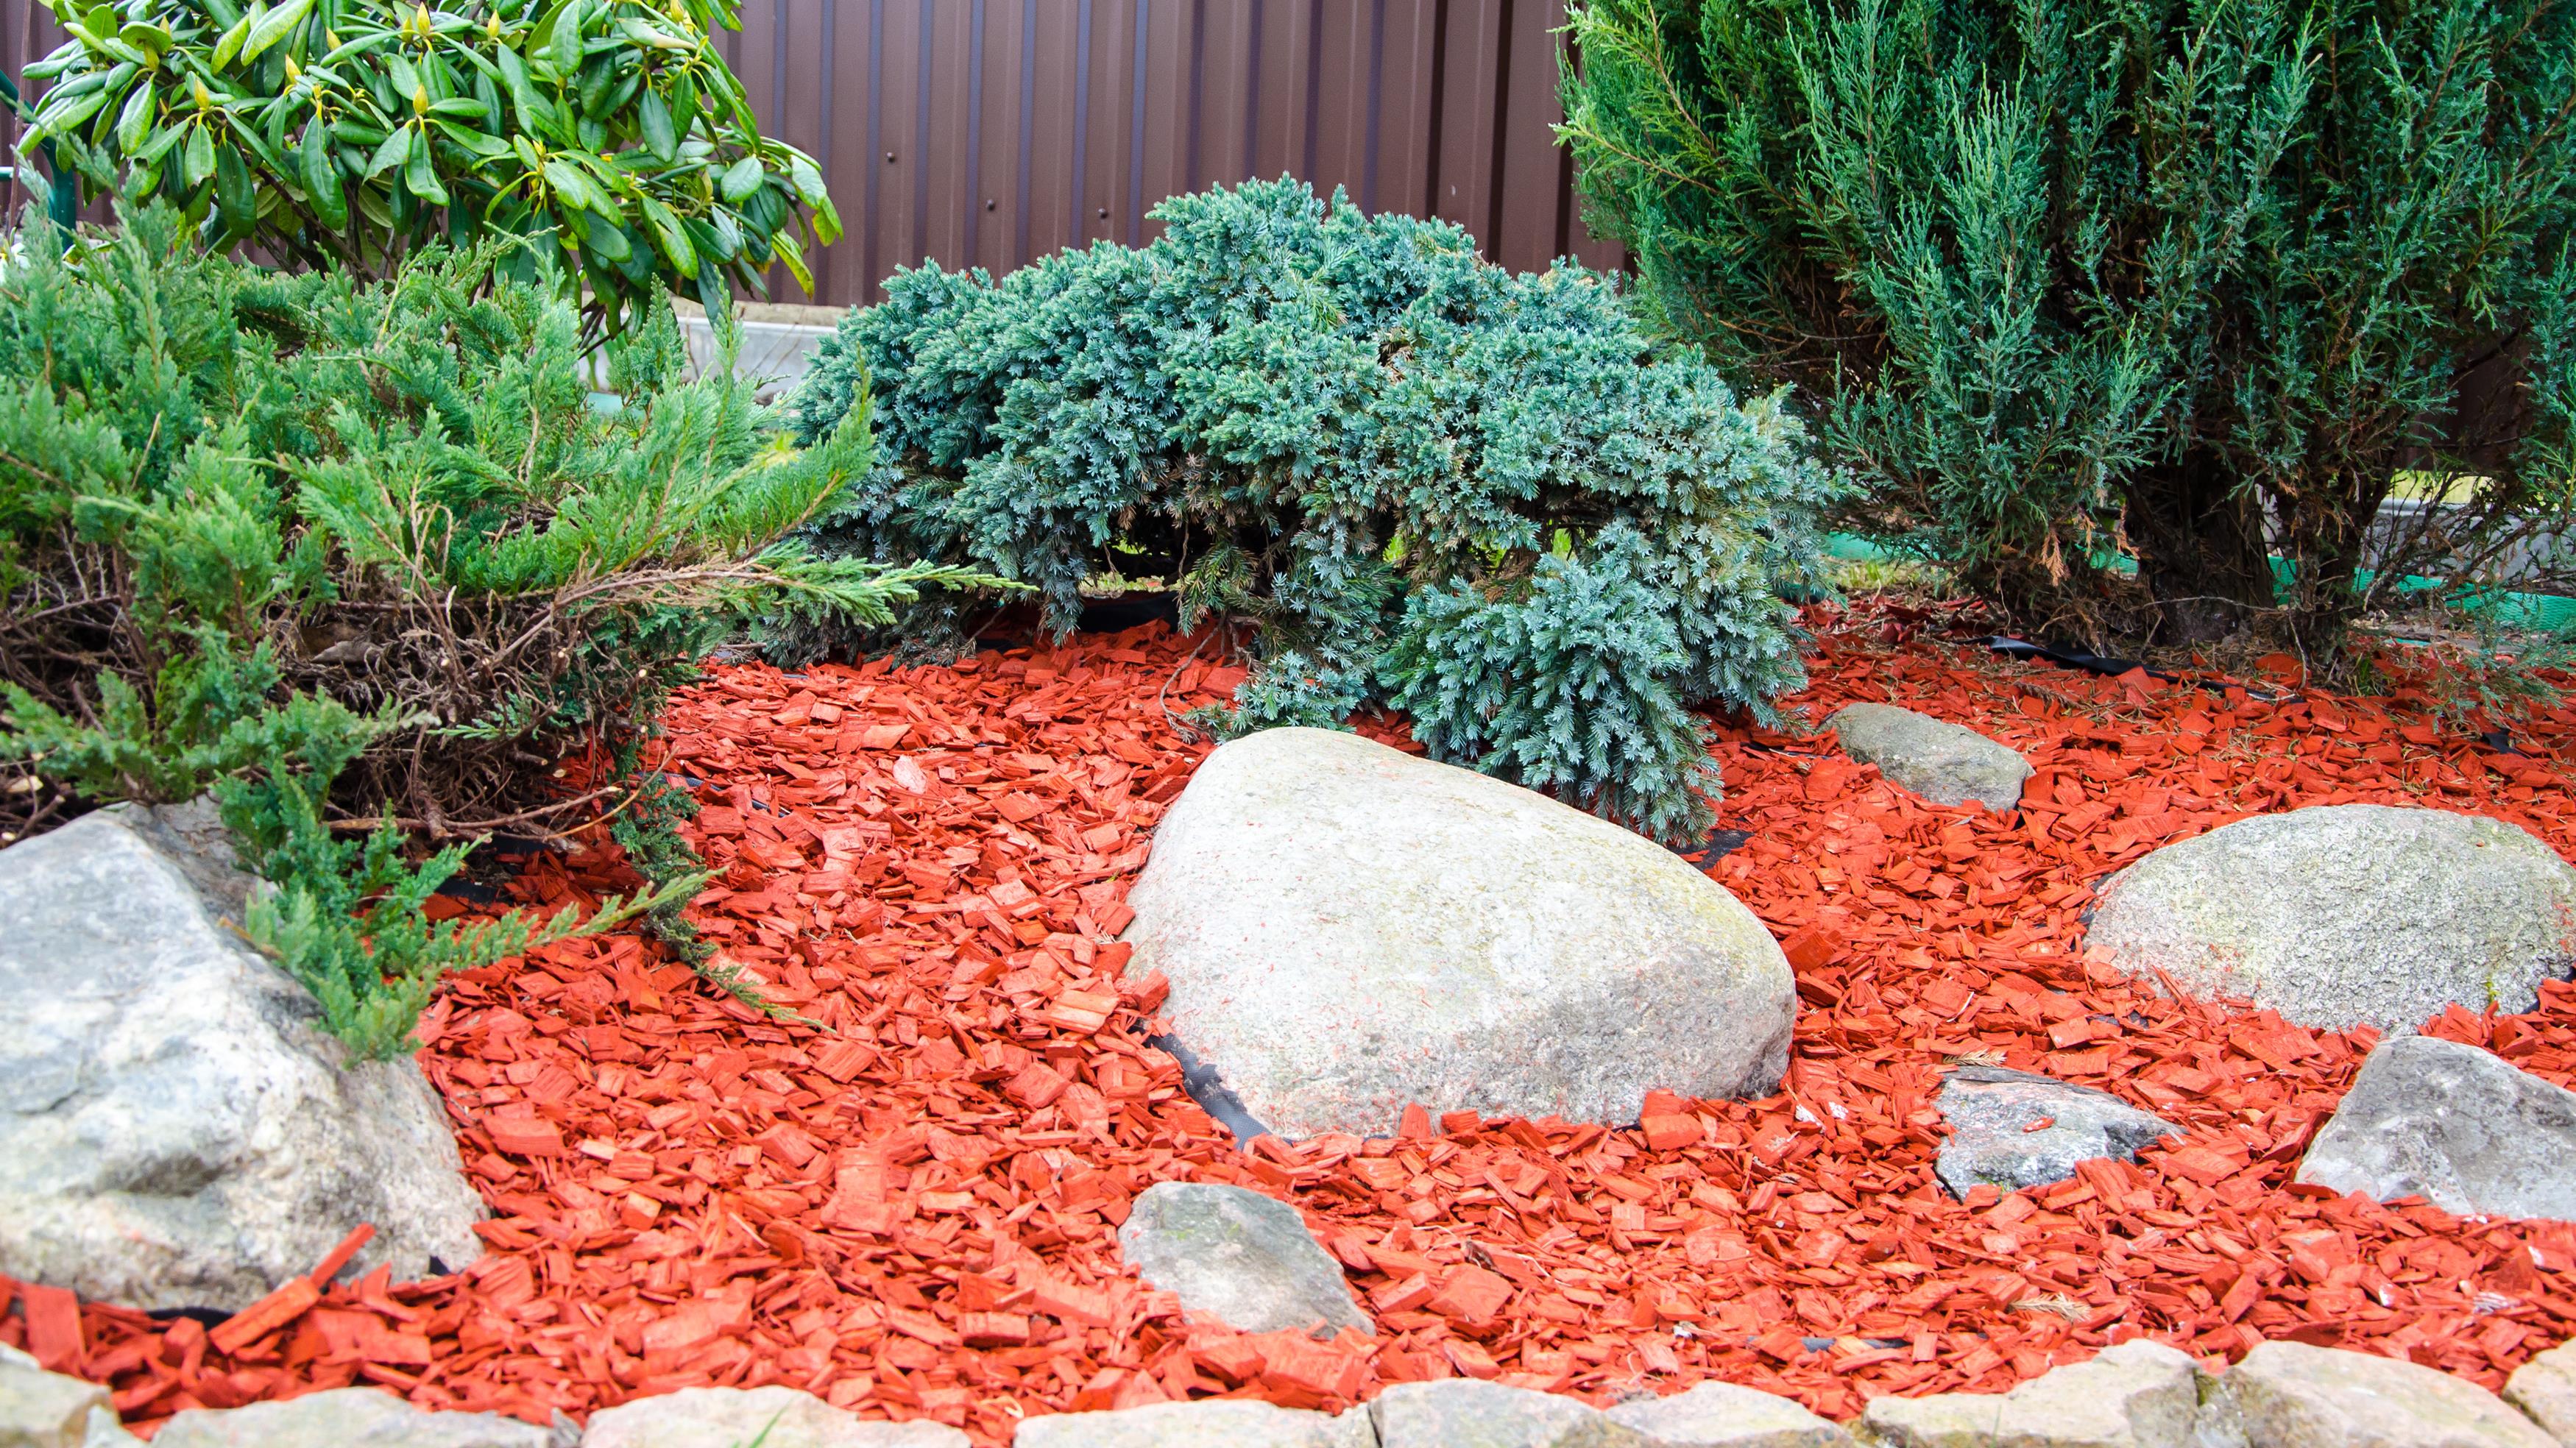 The Mulch Center/Landscaping Supplies                                                                                                                                                                                    